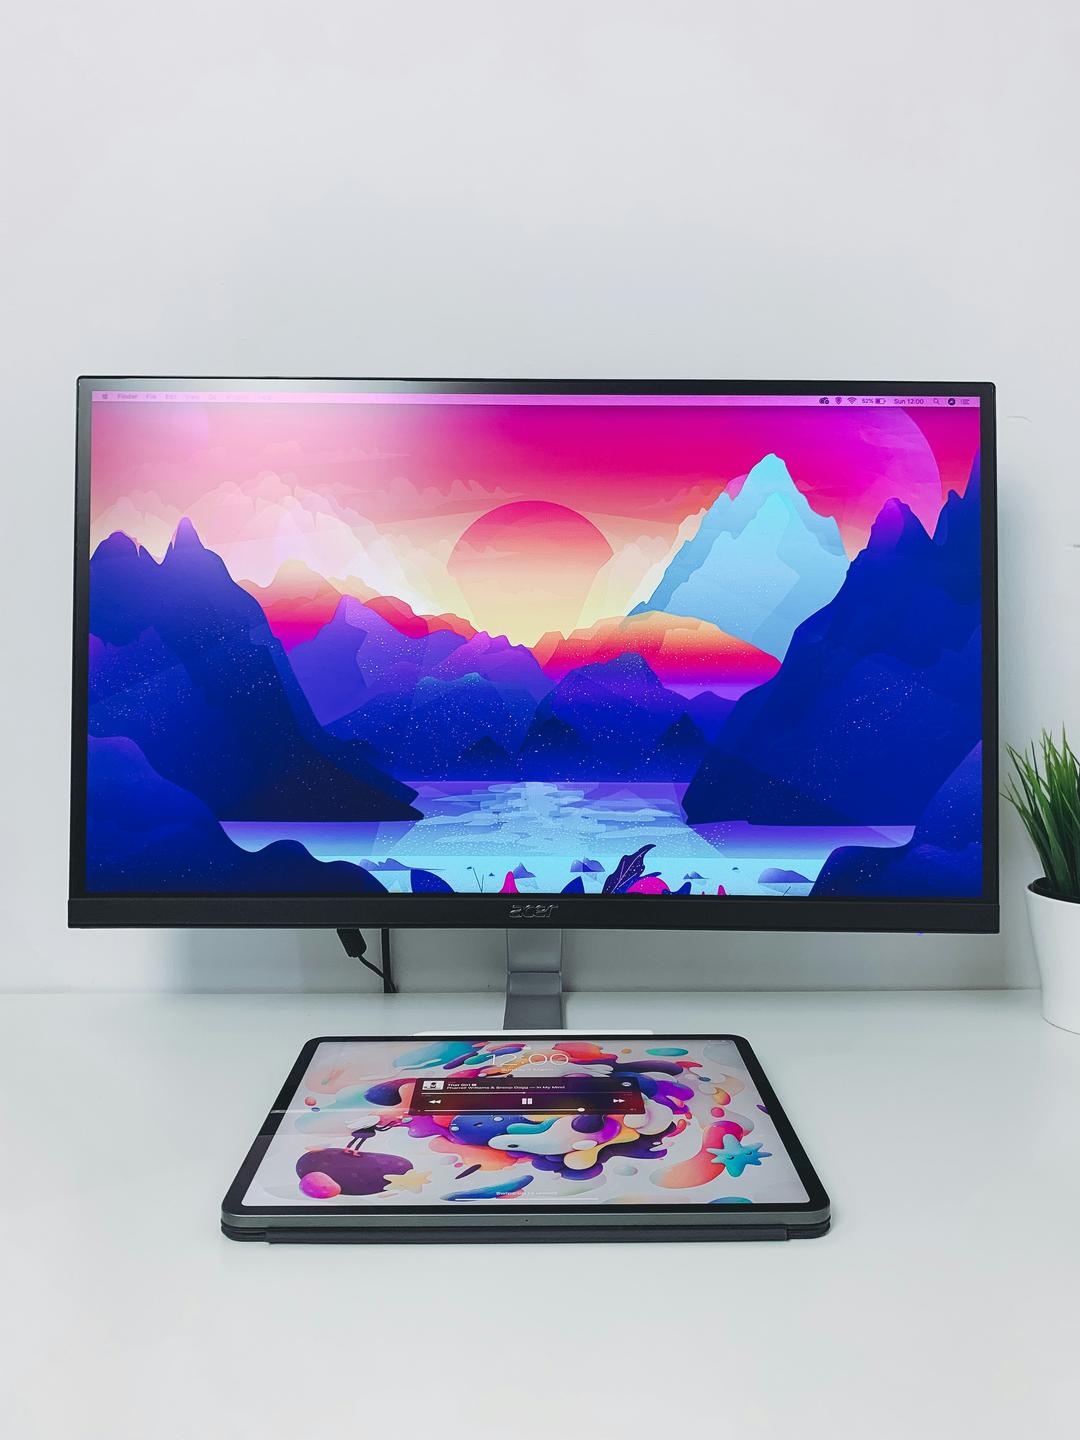 The Dell UltraSharp U2415 is a 24-inch IPS monitor with a 1920 x 1200 resolution, 16:10 aspect ratio, and a wide viewing angle of 178 degrees. It has excellent color accuracy and is ideal for graphic designers and photographers.